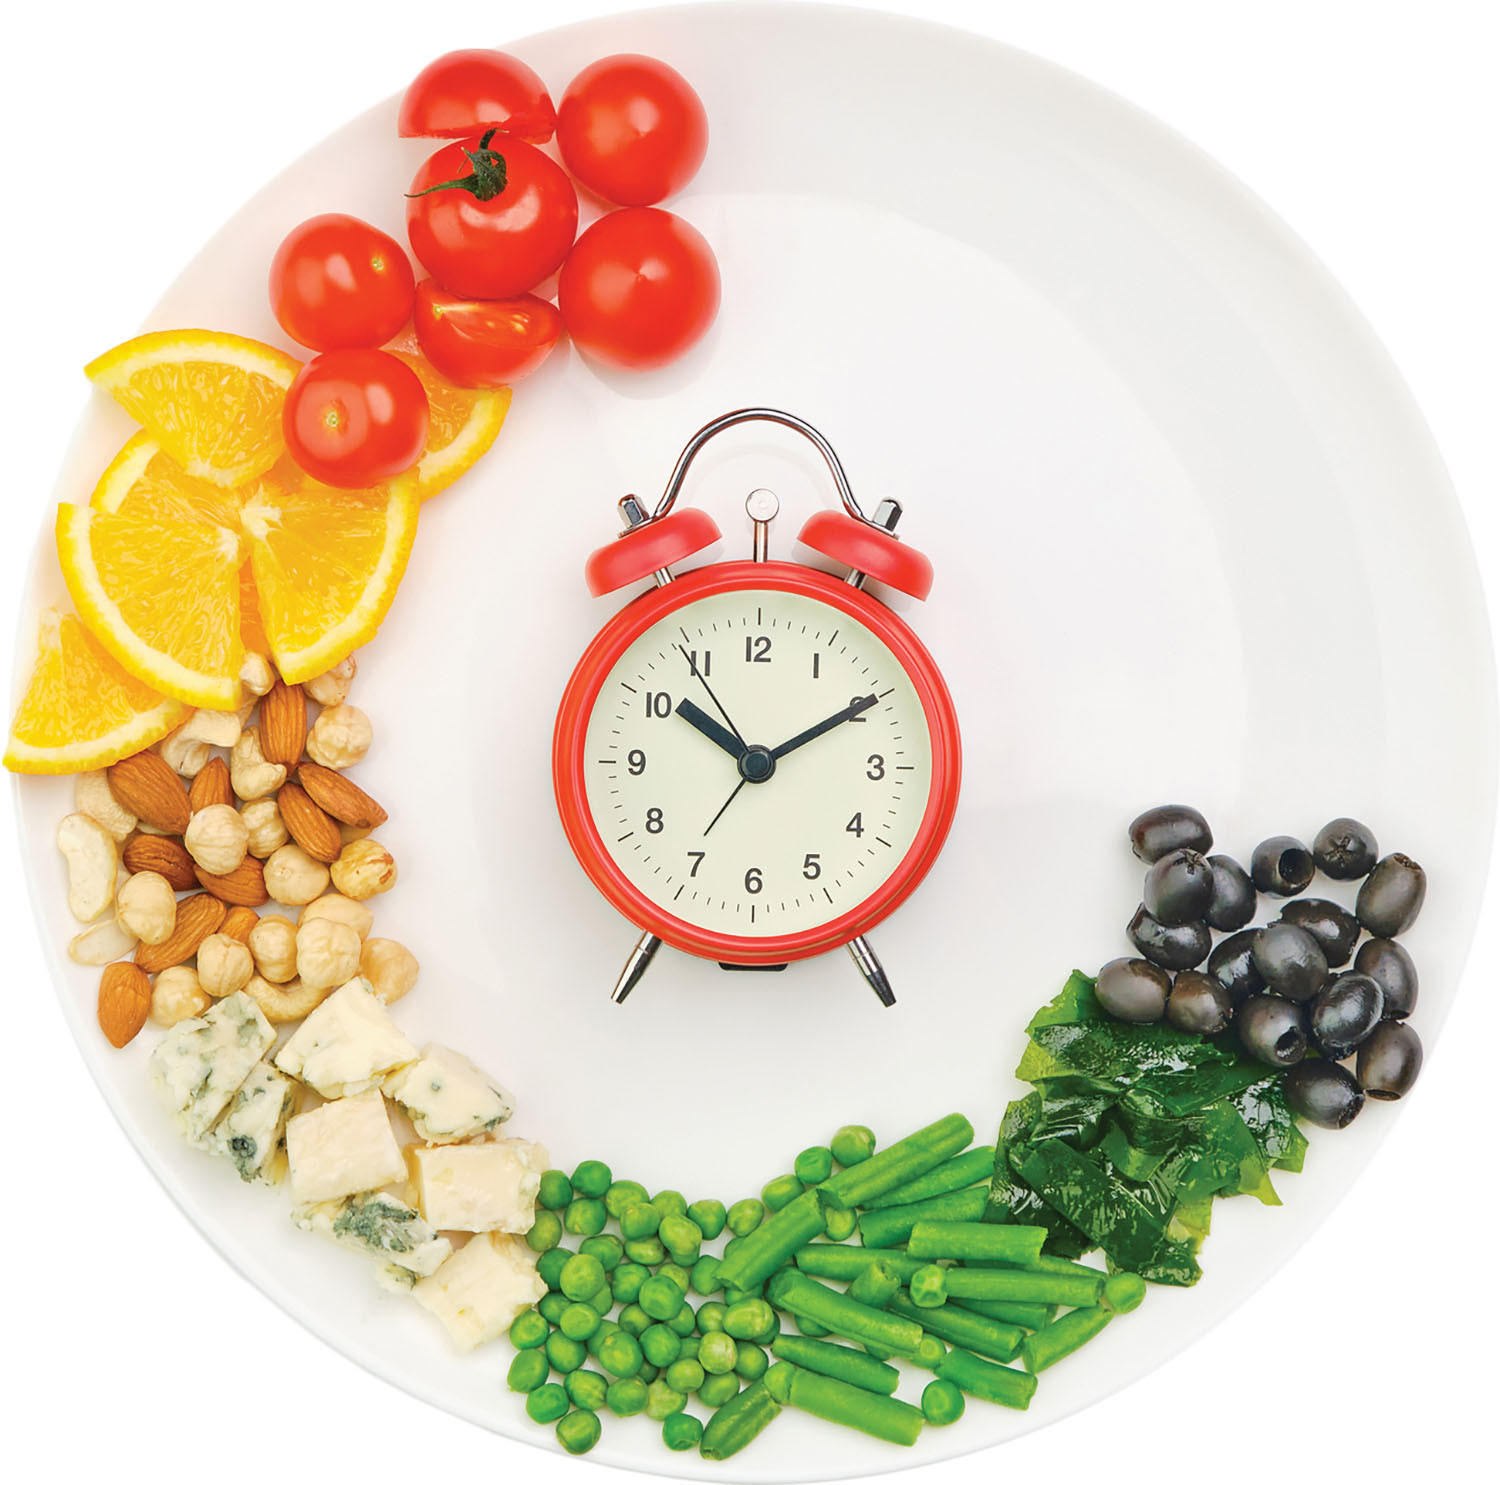 photo of a plate with various healthy foods arranged around the outer edge and a red alarm clock in the center